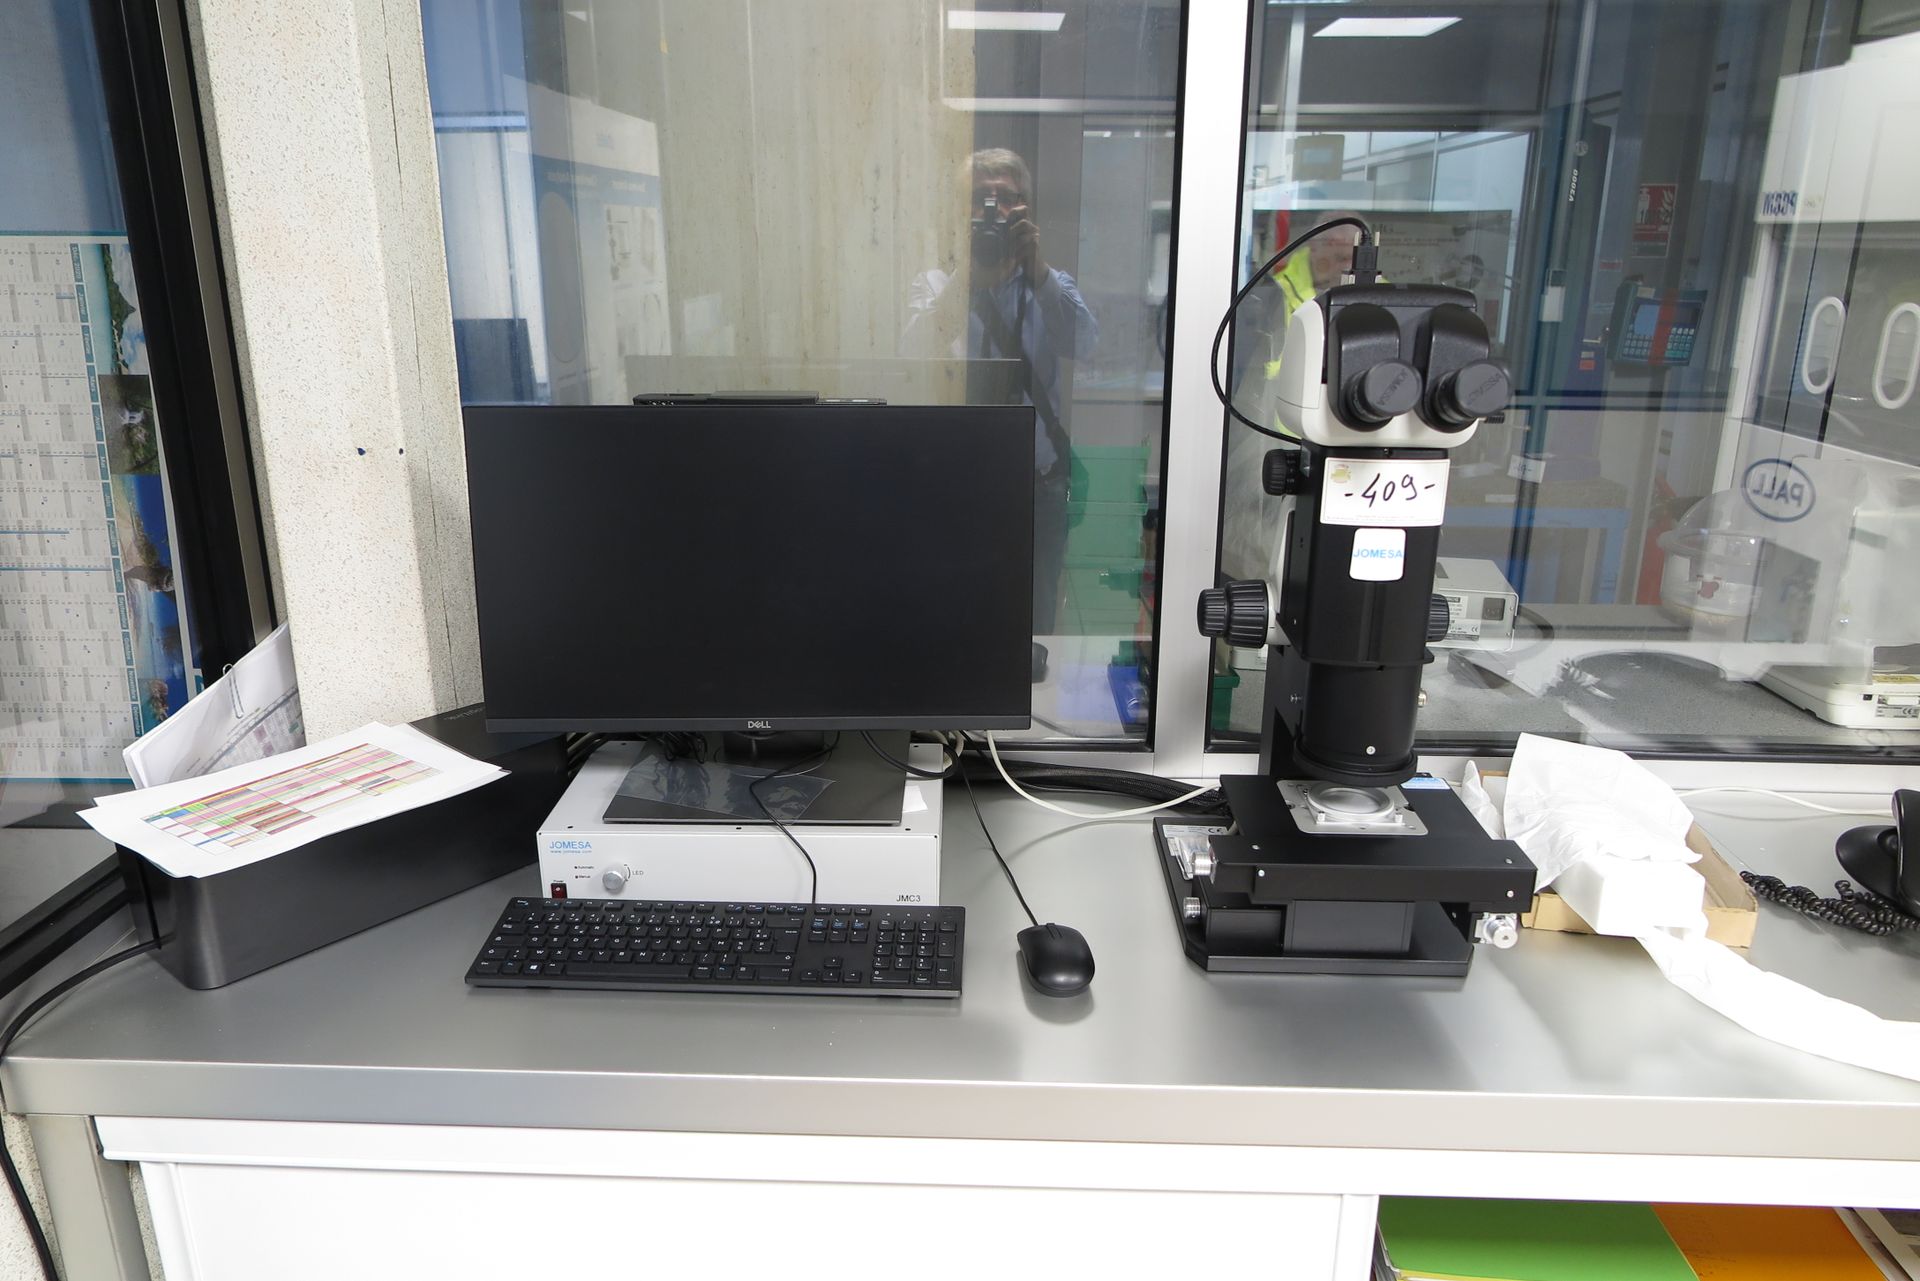 Null JOMESA microscope, type HFD4, N°11-73-2433 with associated computer